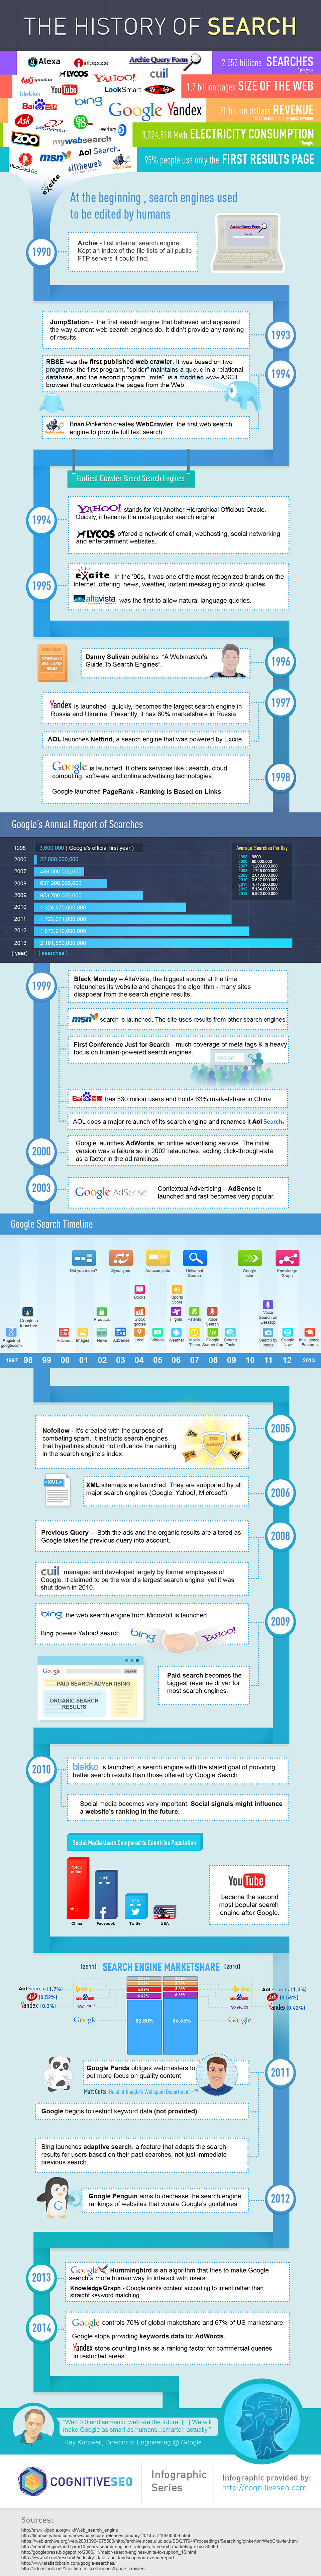 The History of Search & Search Engines